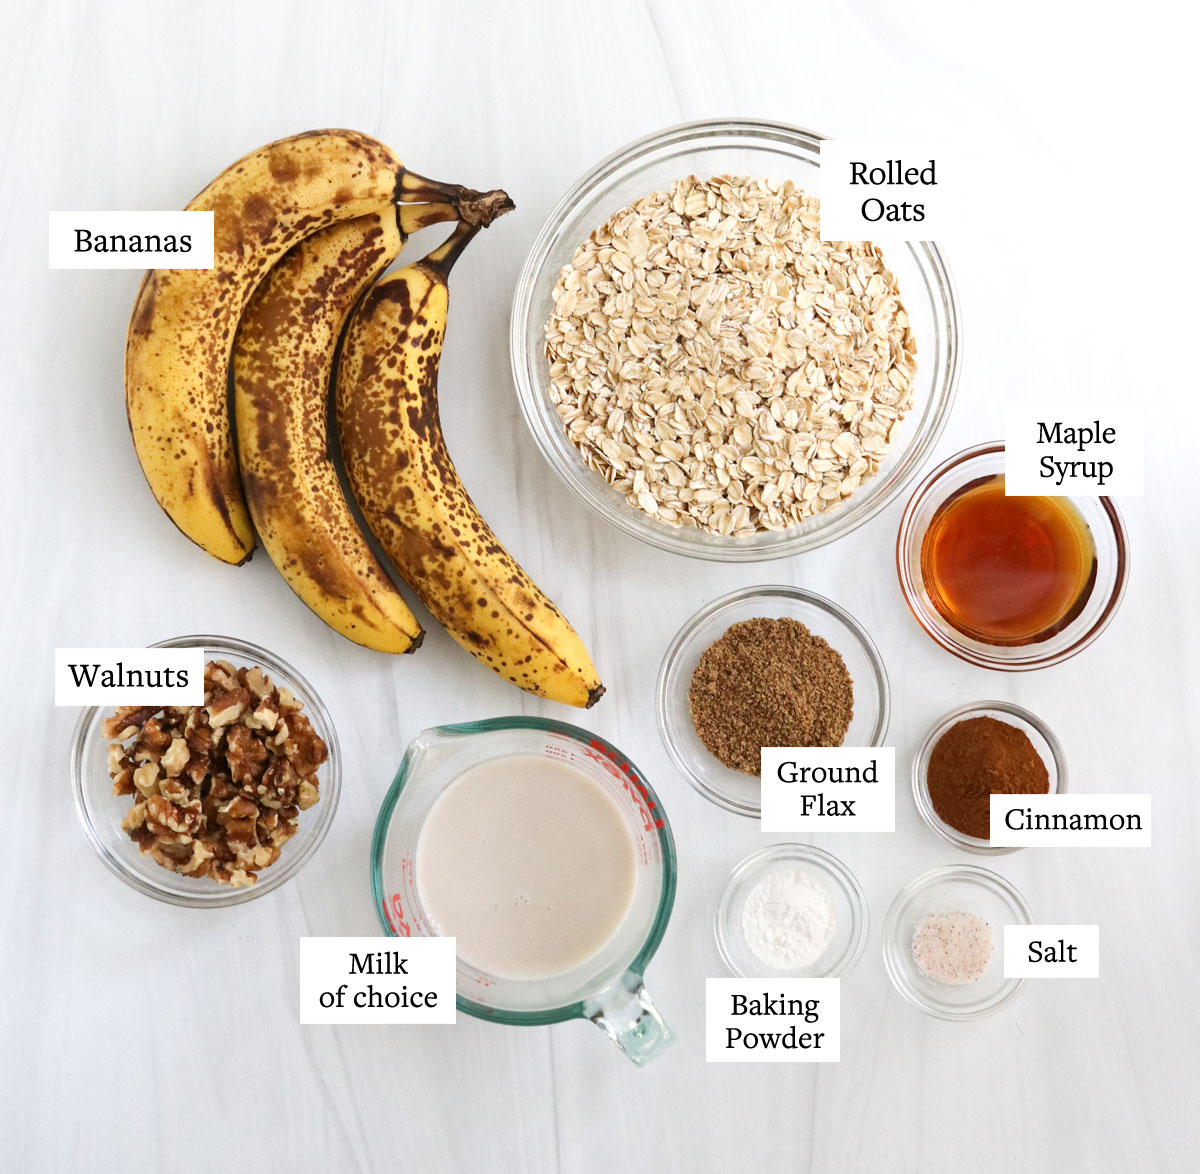 baked banana oatmeal ingredients on white surface.